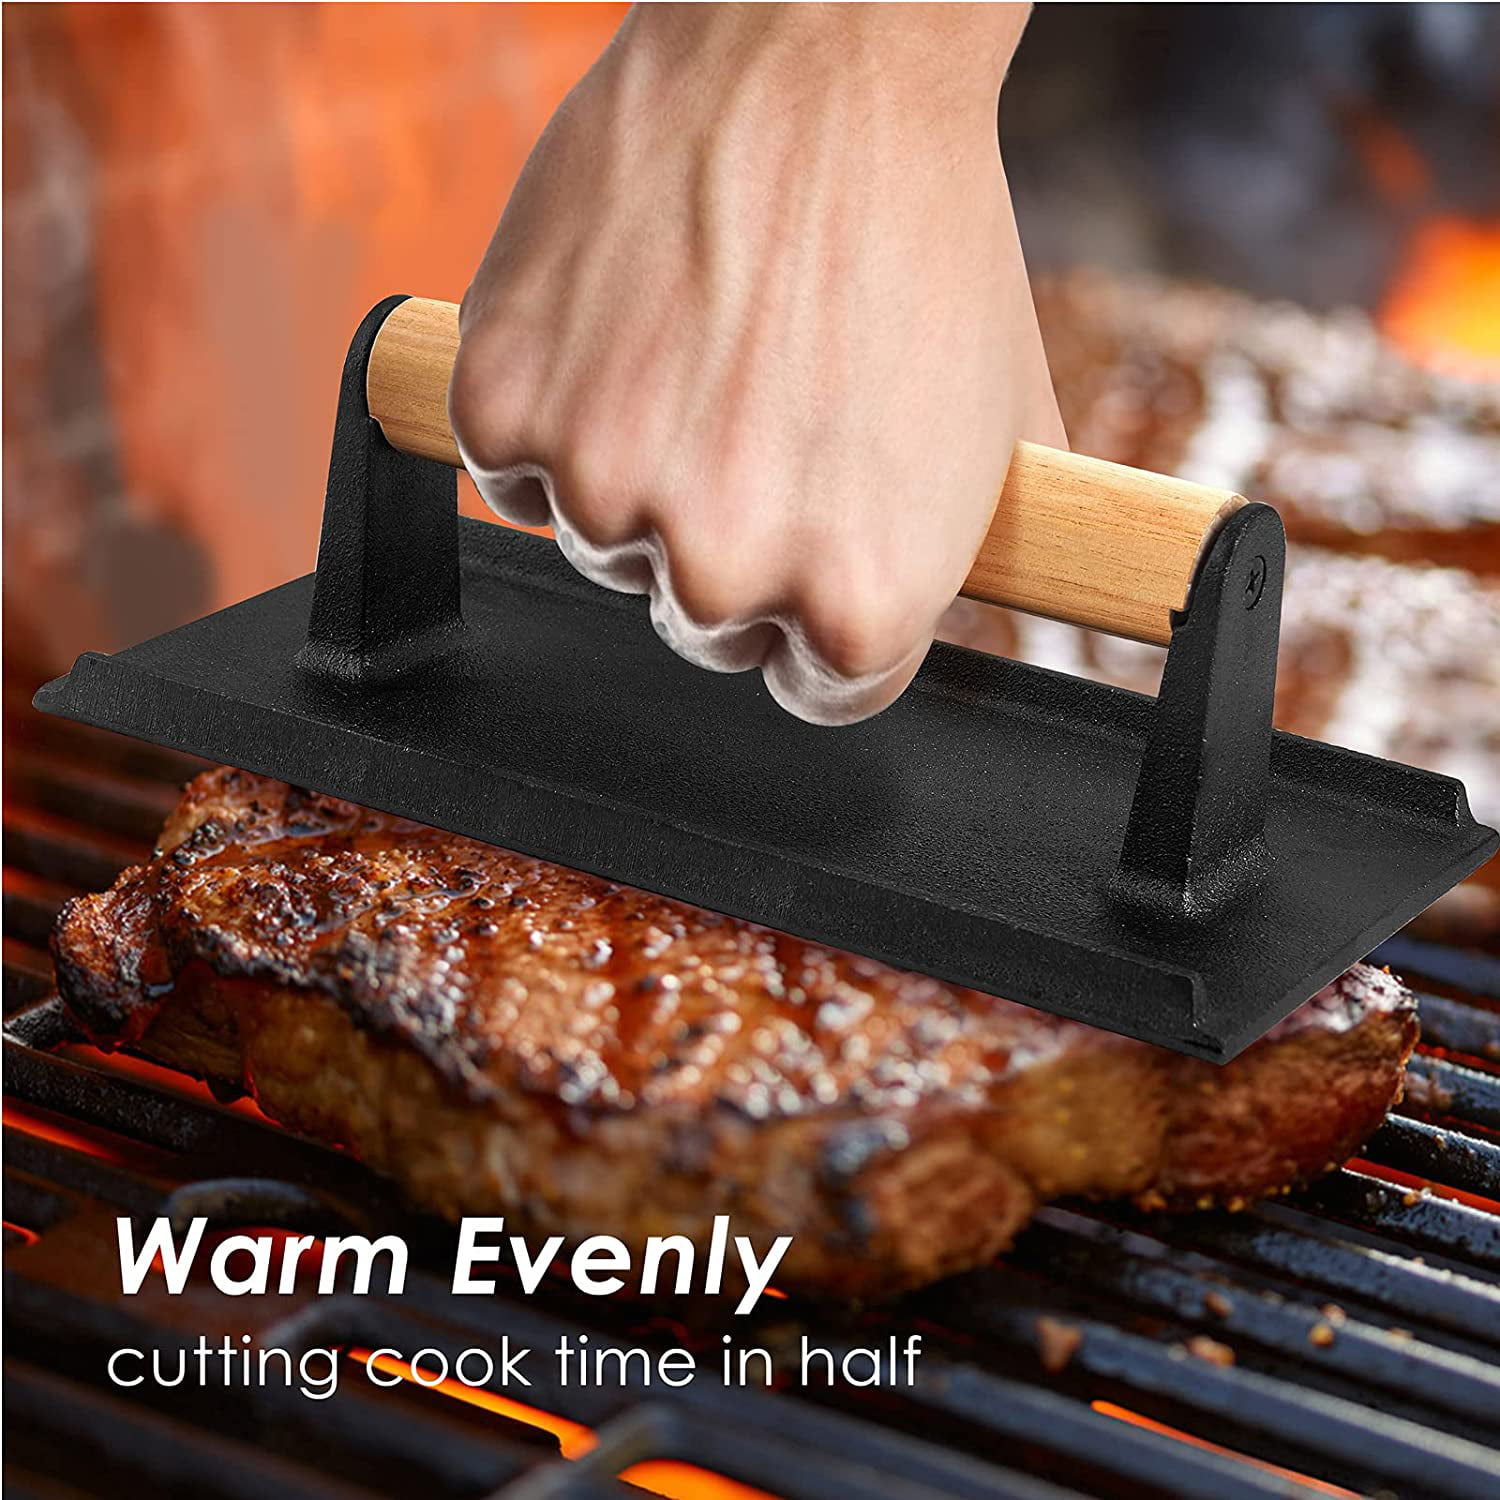 Griddles Textured Cast Iron Grill Weight Grills Perfect Meat Press for Bacon Great Accessory for Flat Tops Chicken and Paninis Ovens or Skillets for Restaurant Quality Food. Burgers Steak 